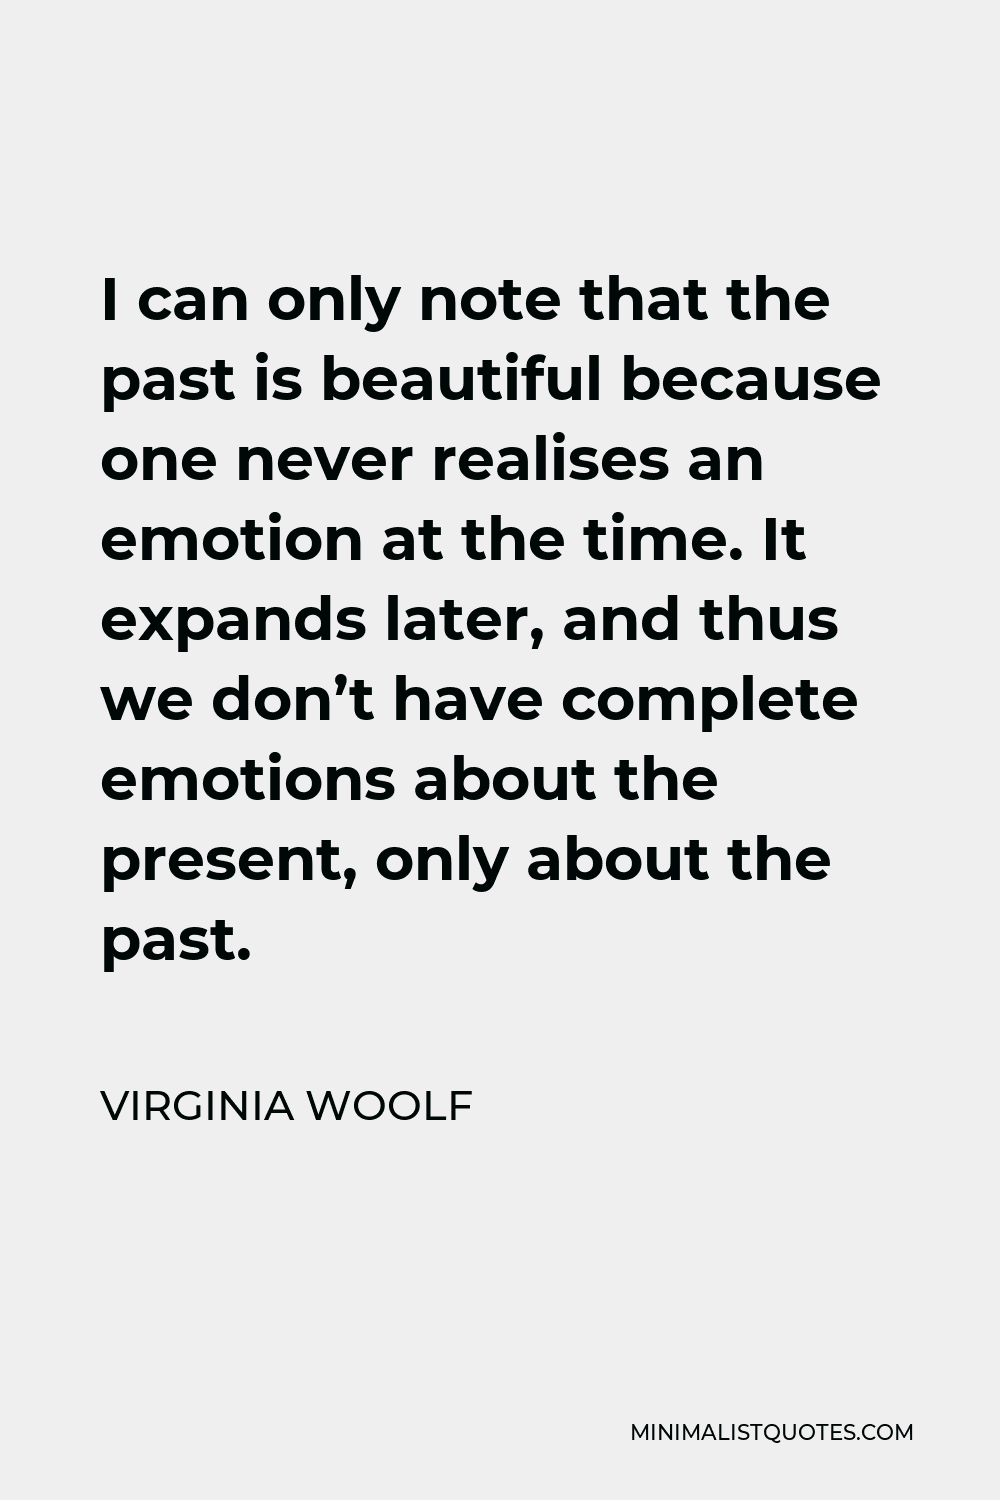 Virginia Woolf Quote - I can only note that the past is beautiful because one never realises an emotion at the time. It expands later, and thus we don’t have complete emotions about the present, only about the past.